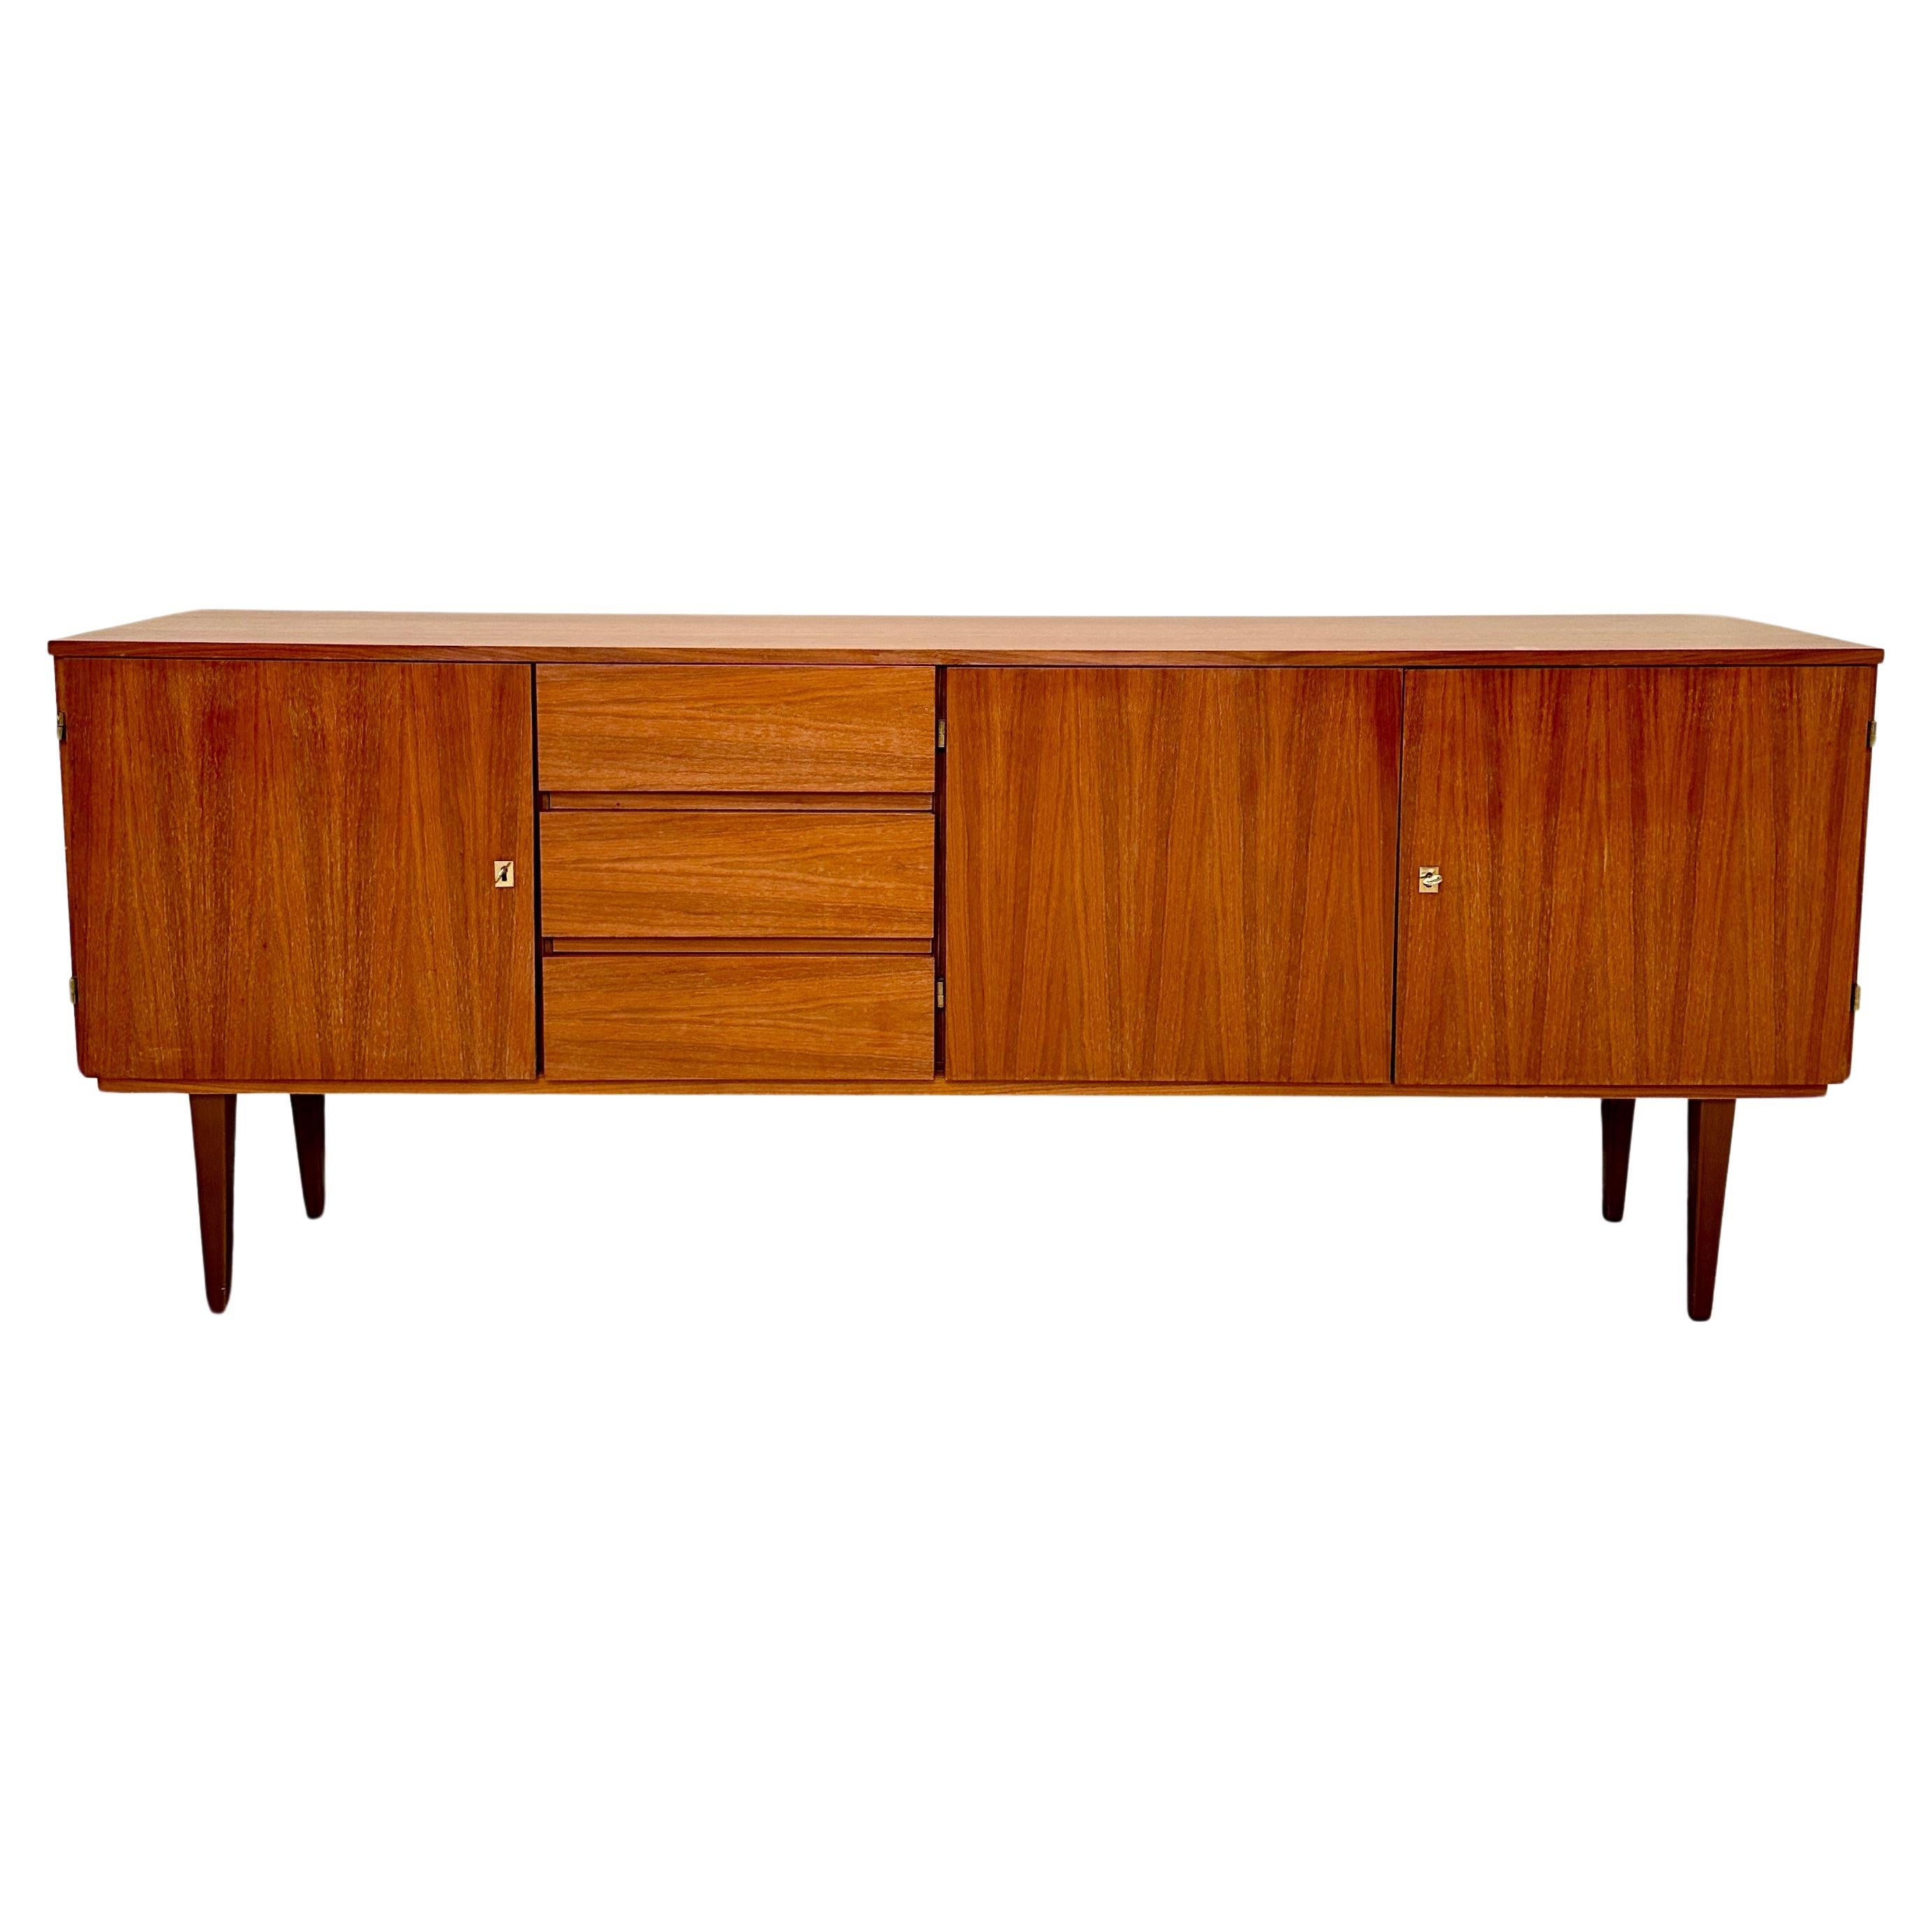 Mid Century German Sideboard Brown Walnut with Drawers and Doors, around 1960